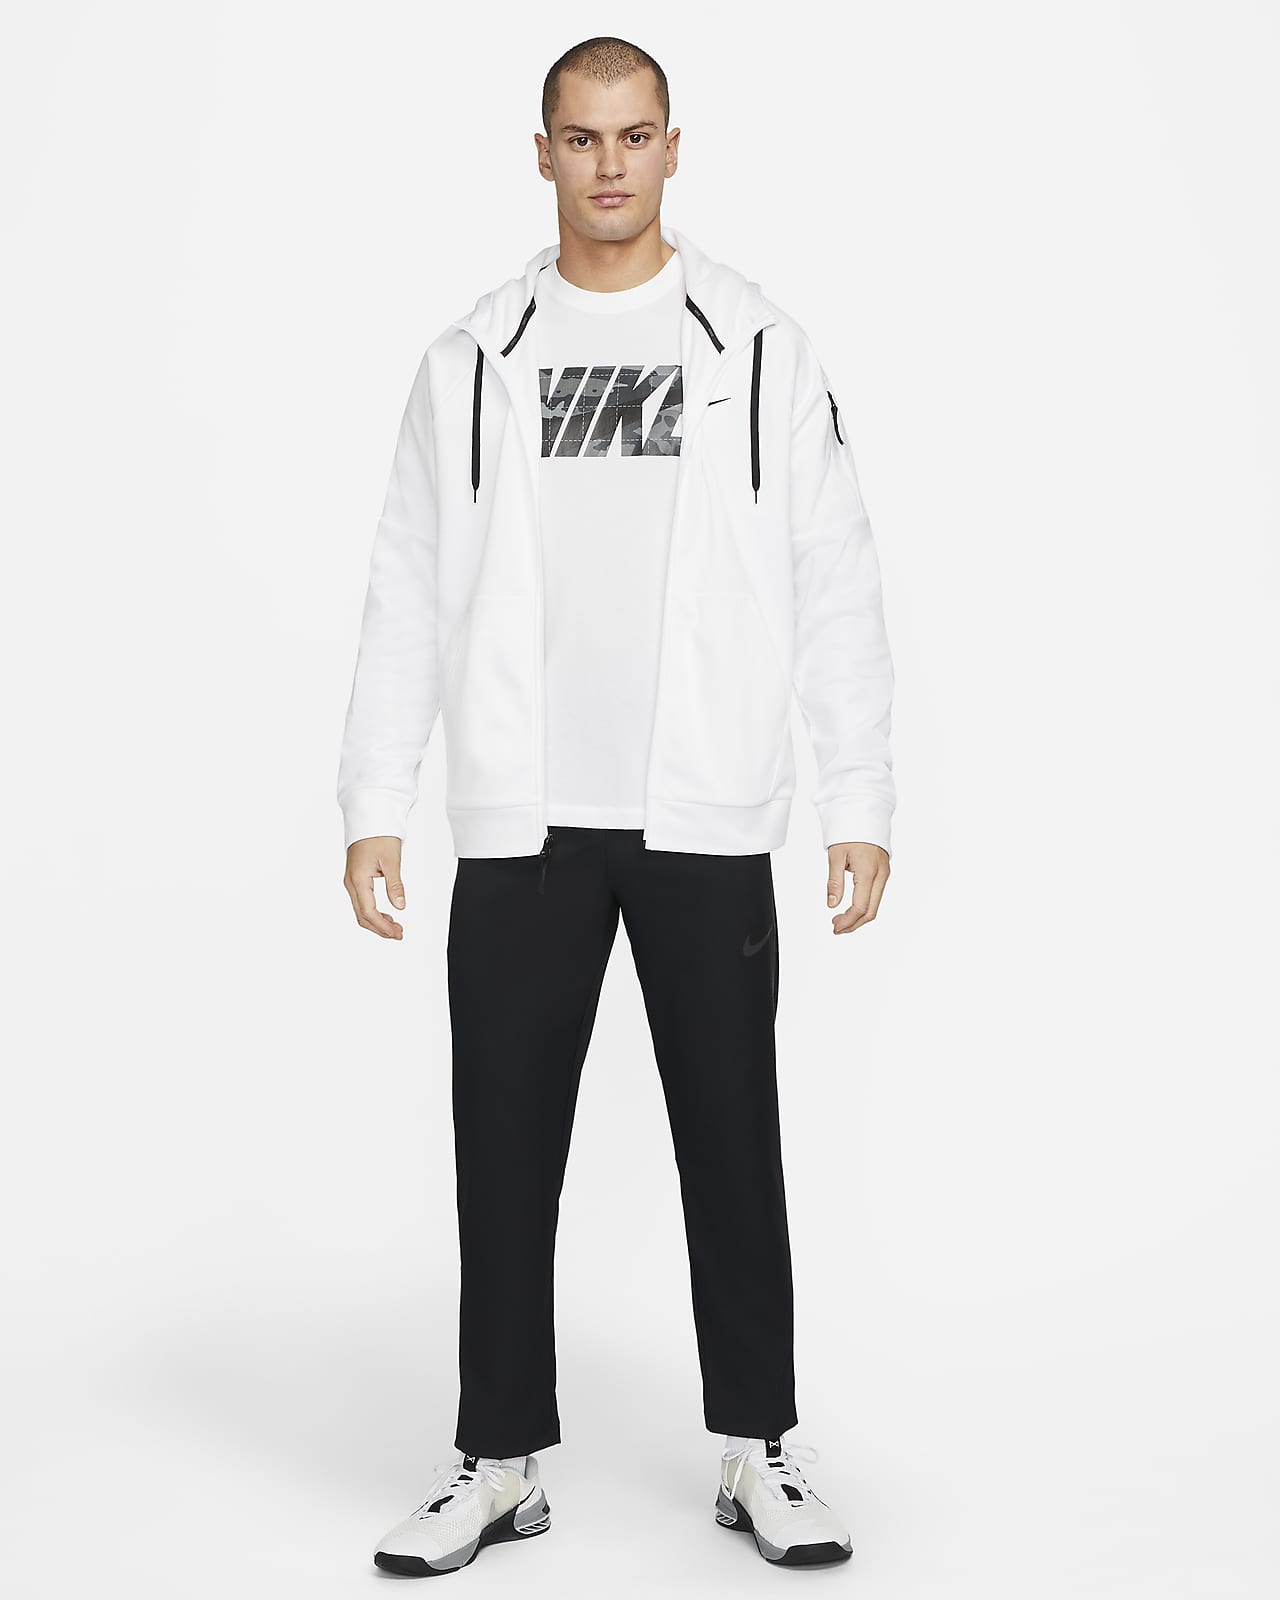 Nike Therma-FIT Men's Fitness Crew.